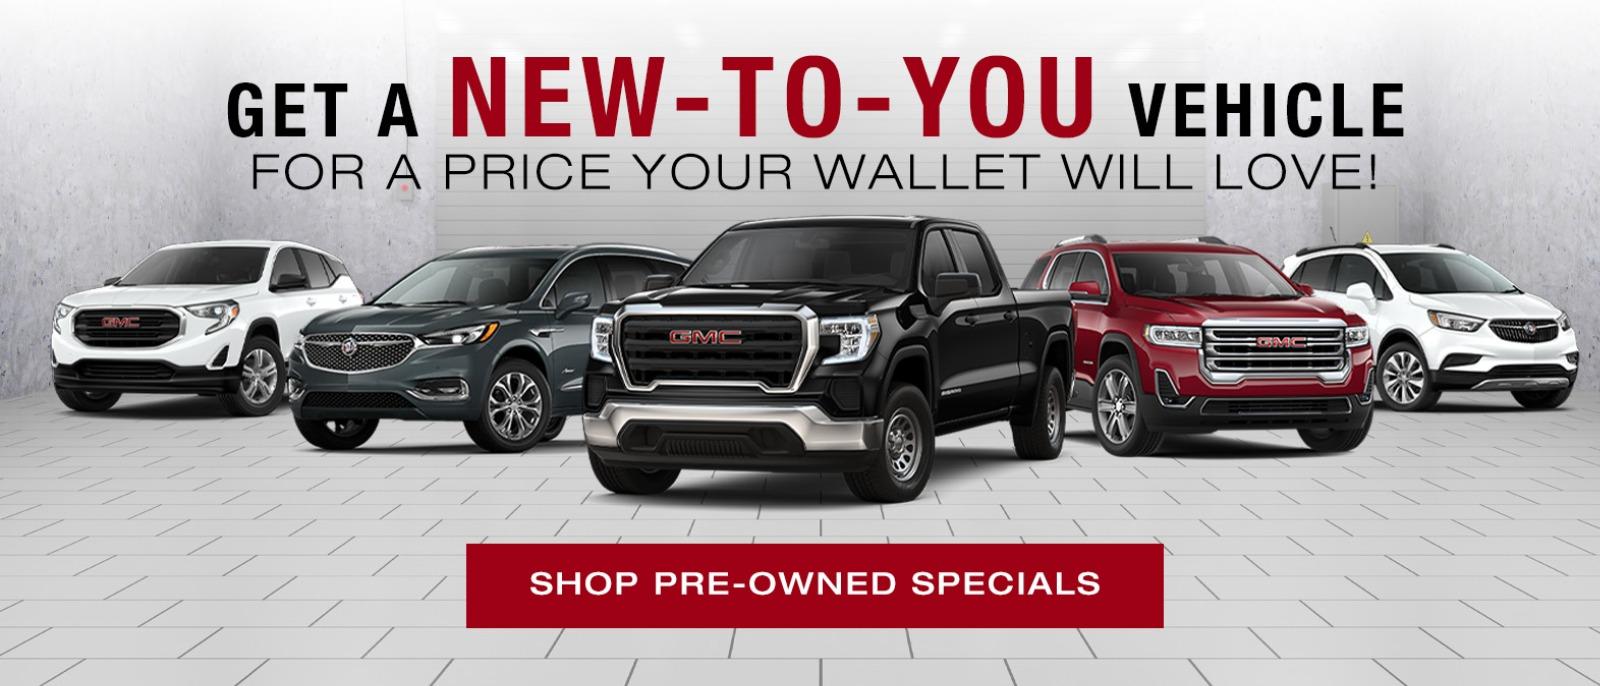 Shop Our Pre-Owned Vehicle Specials!